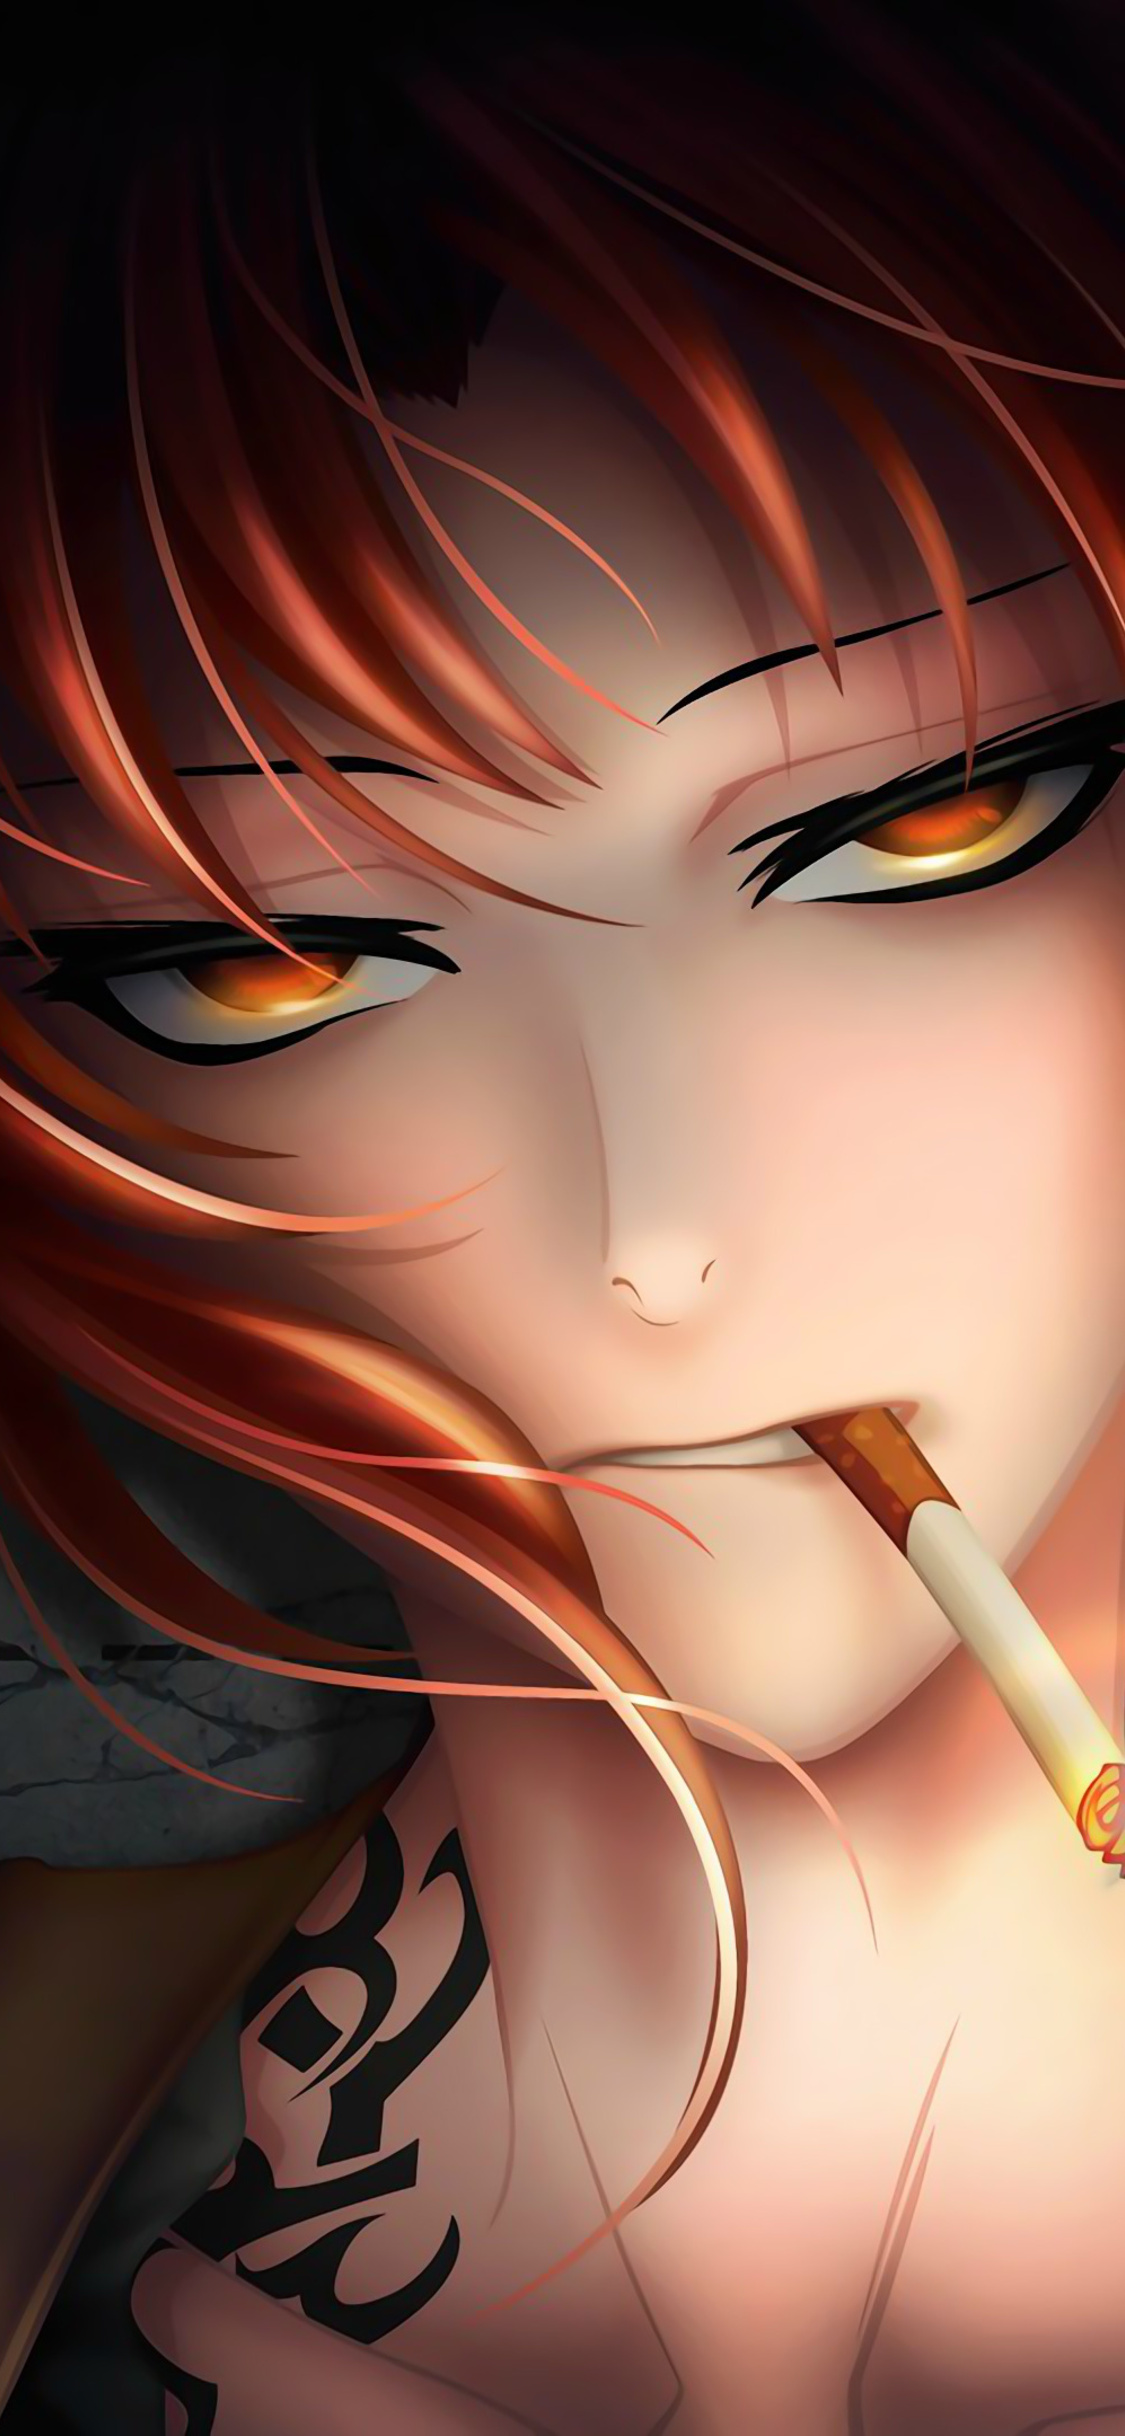 Black Lagoon wallpaper by Underpowered  Download on ZEDGE  38c3